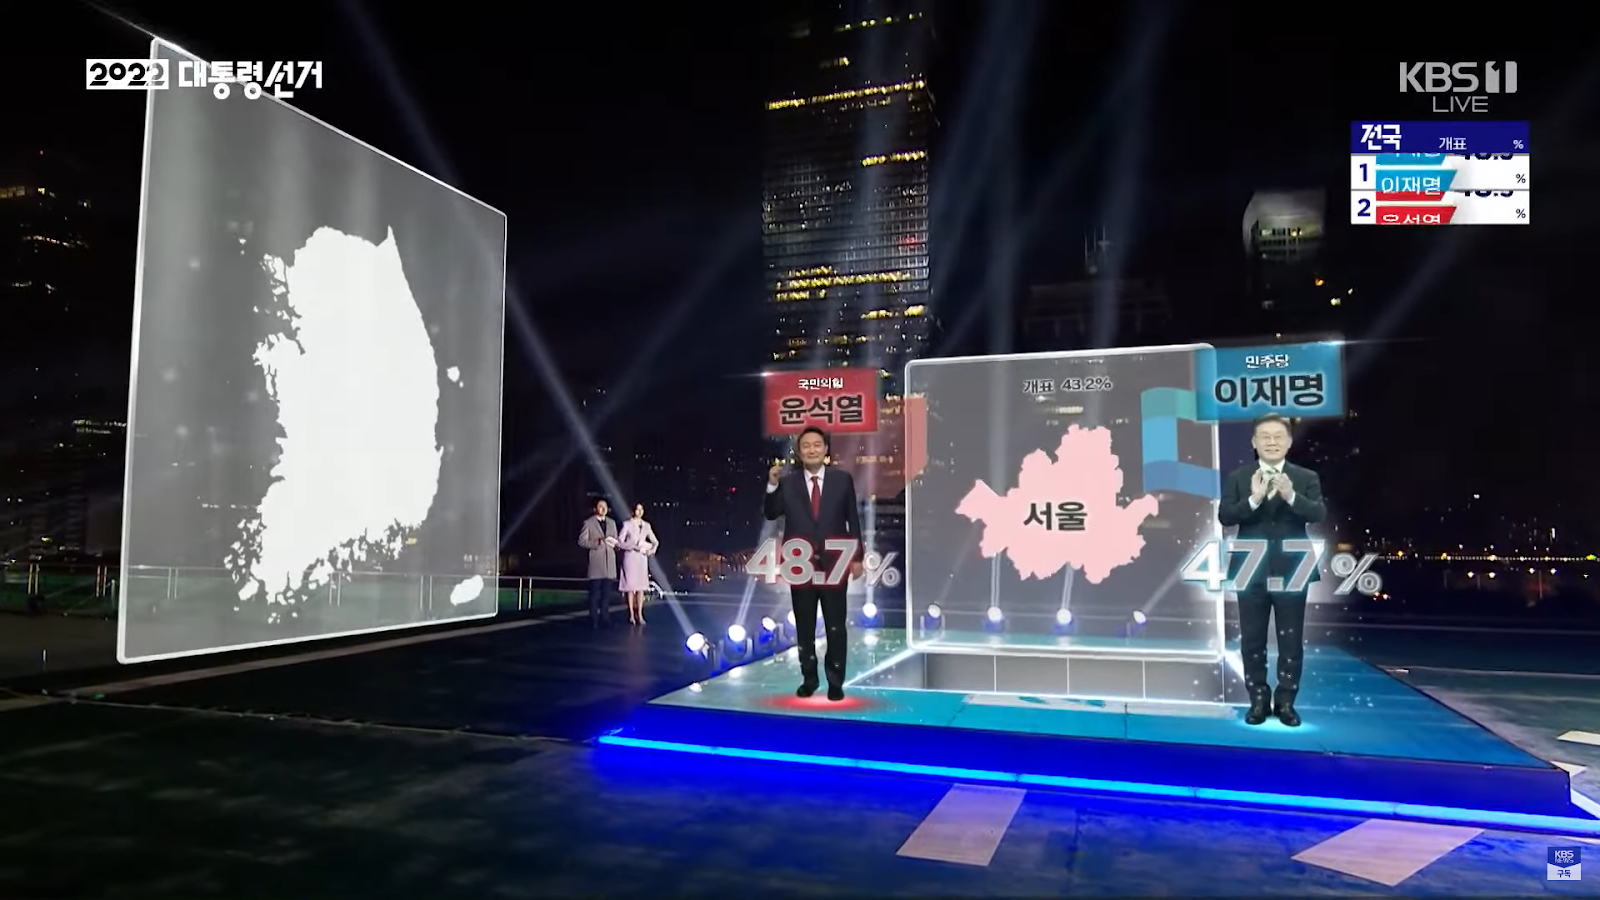 XR being used to merge physical TV presenters with a virtual world to help display highly engaging graphics on set at KBS